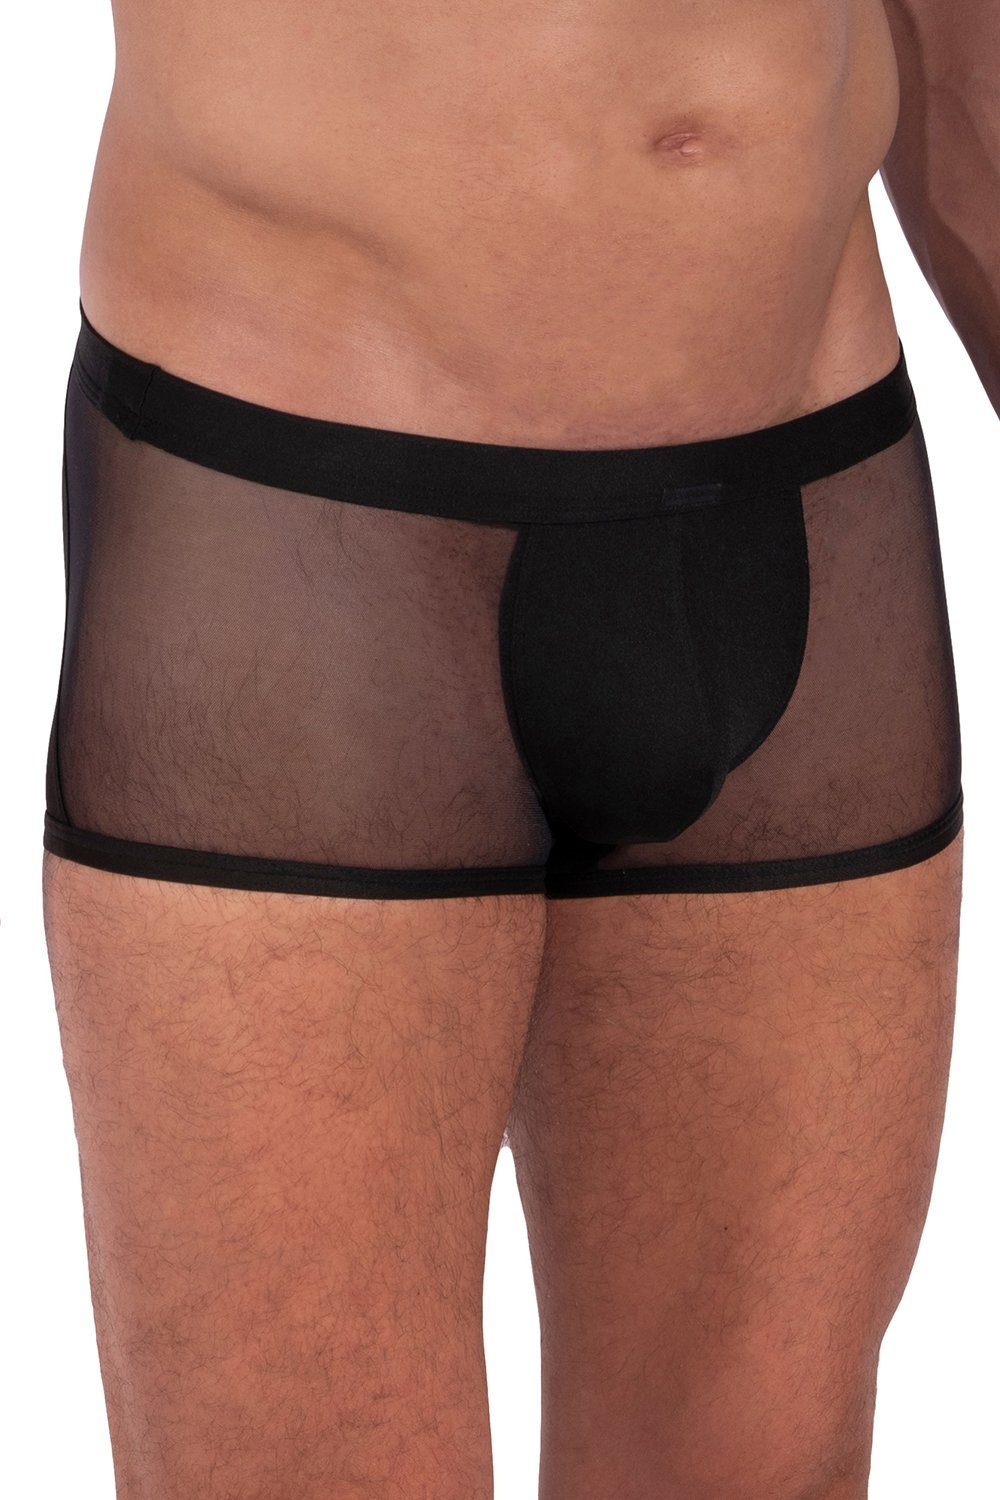 MANSTORE Hipster Micro Pants 212233